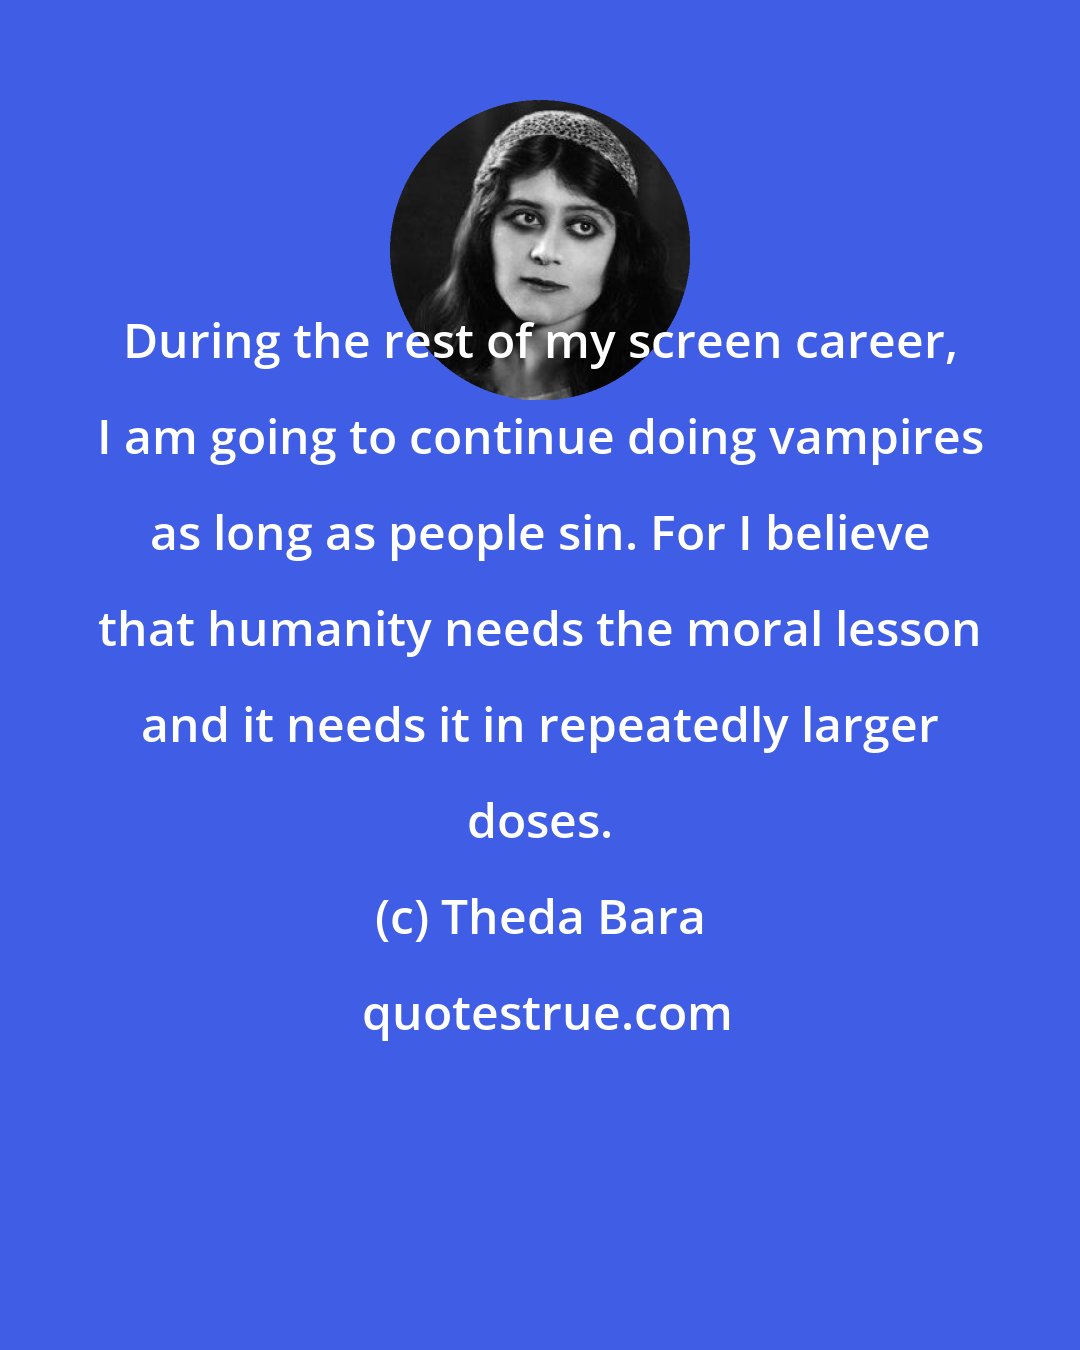 Theda Bara: During the rest of my screen career, I am going to continue doing vampires as long as people sin. For I believe that humanity needs the moral lesson and it needs it in repeatedly larger doses.